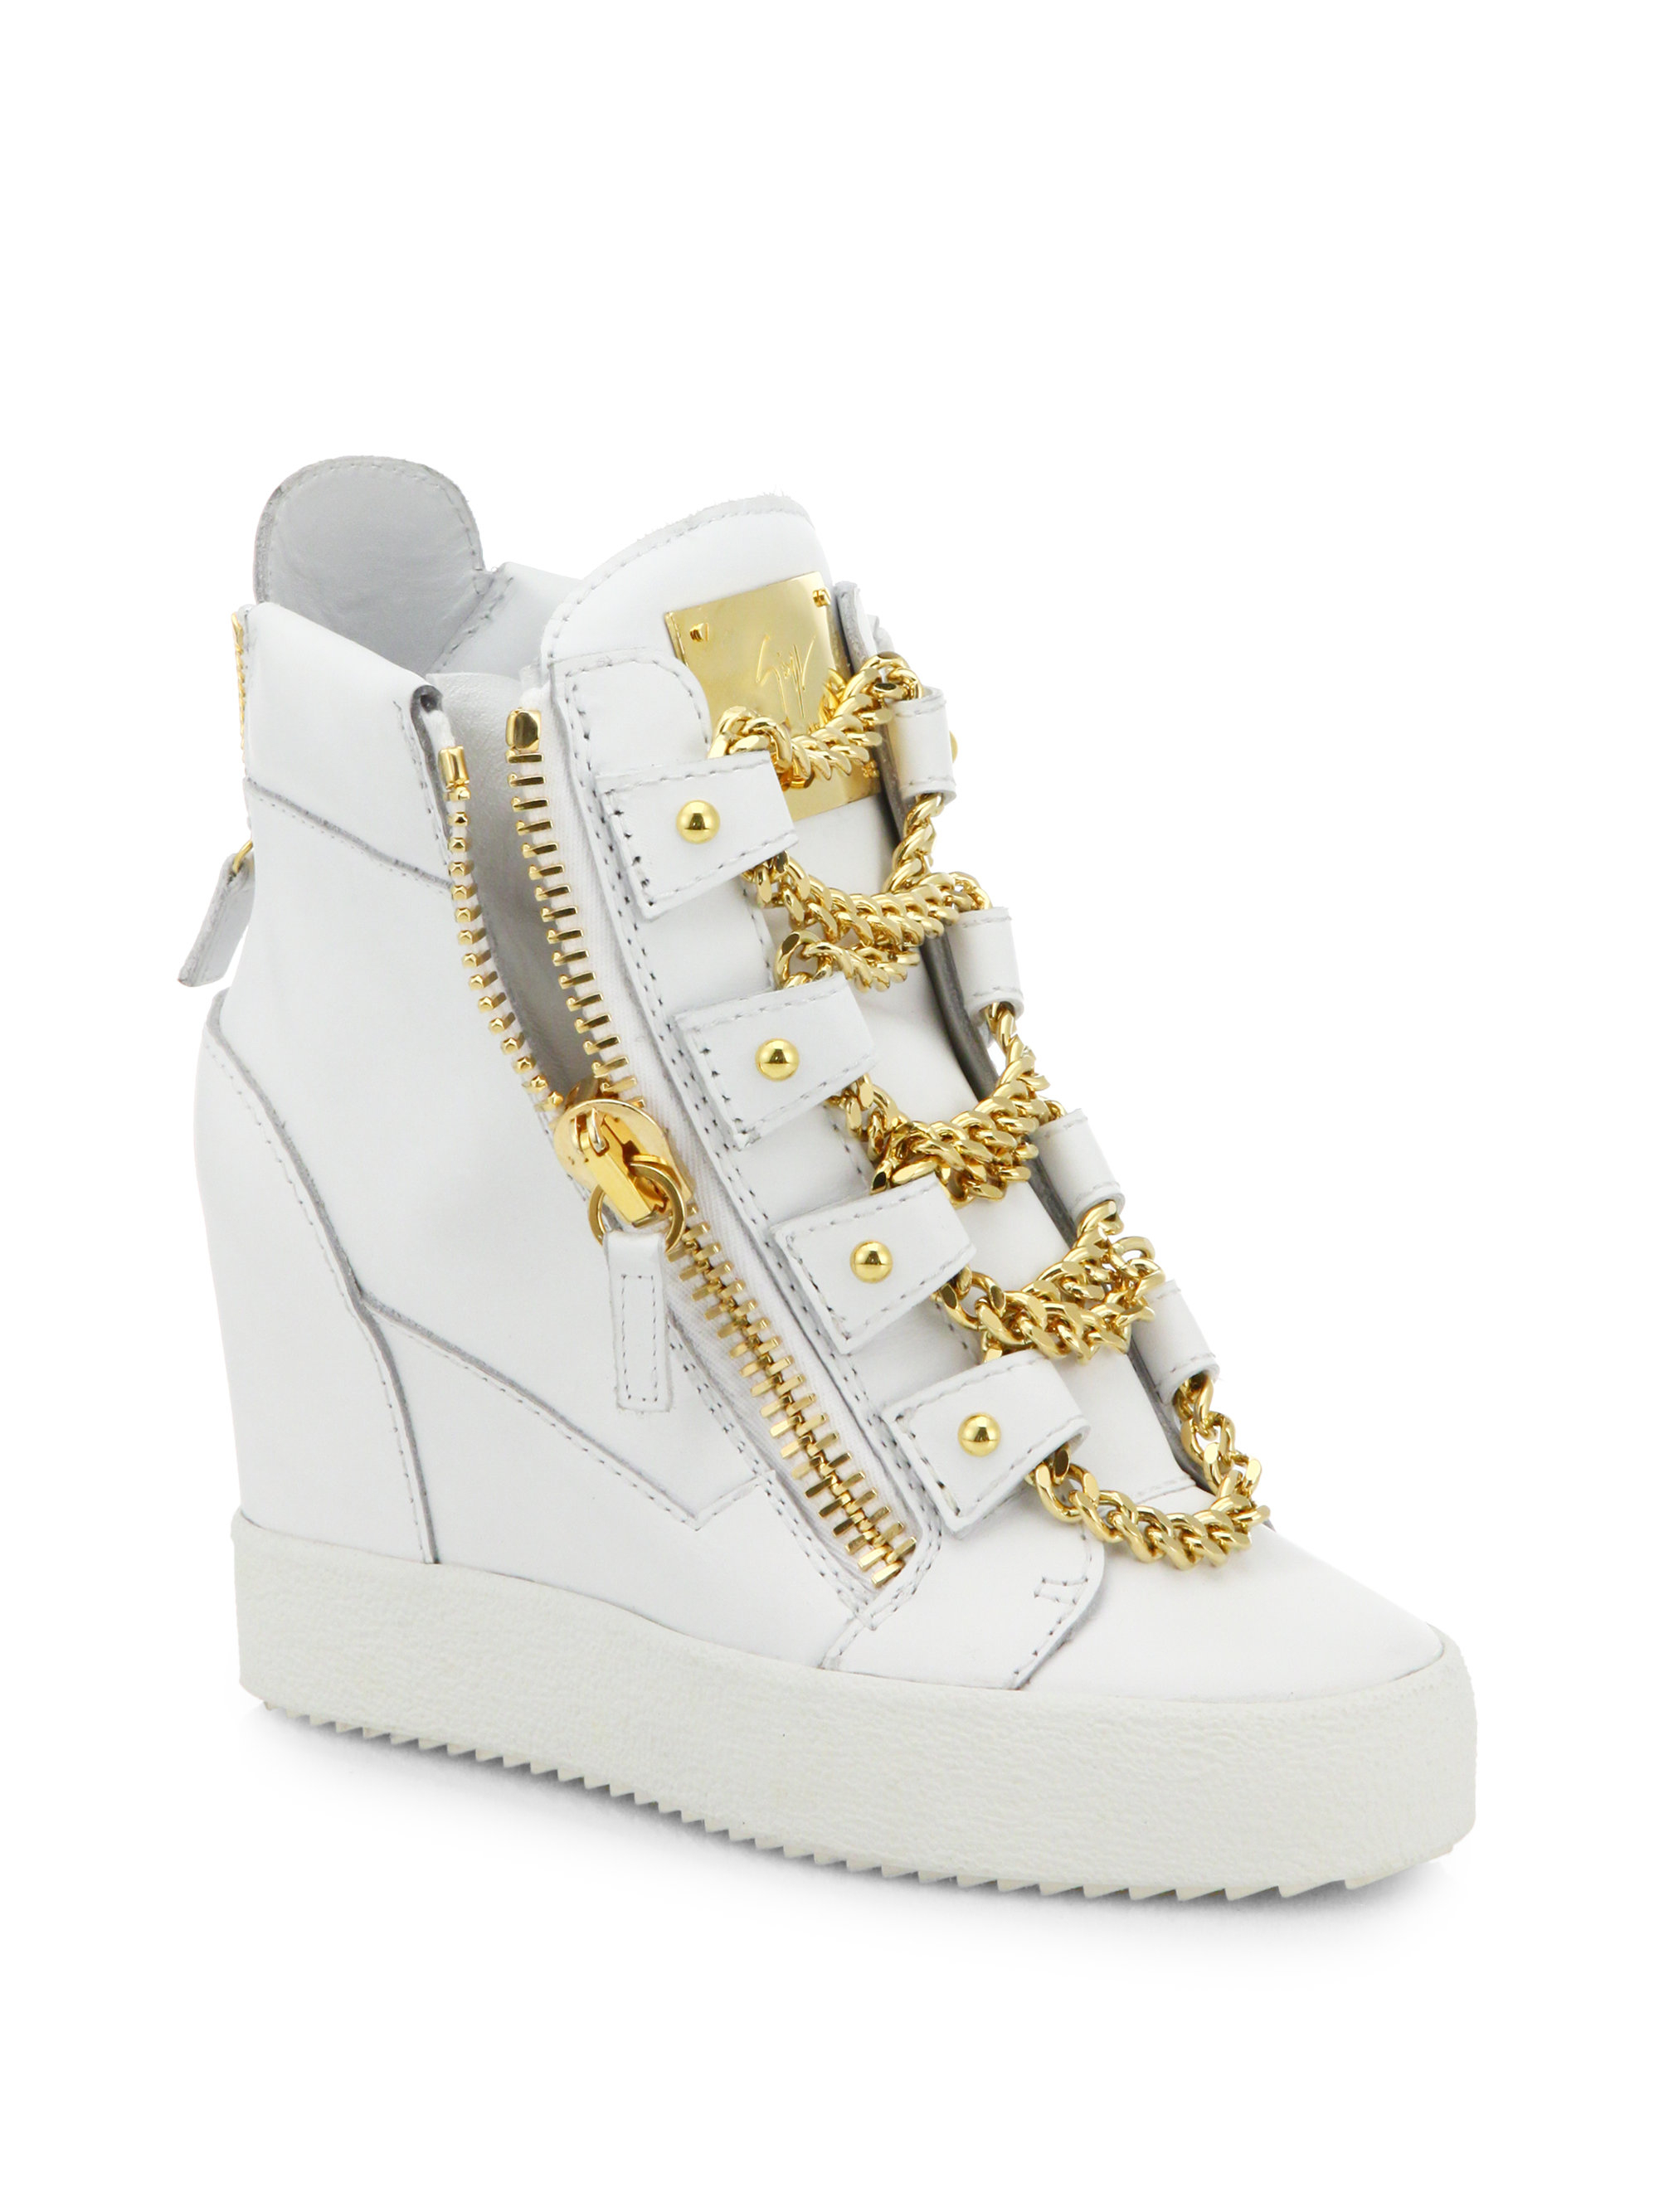 Lyst - Giuseppe Zanotti Chains Leather Wedge High-Top Sneakers in White